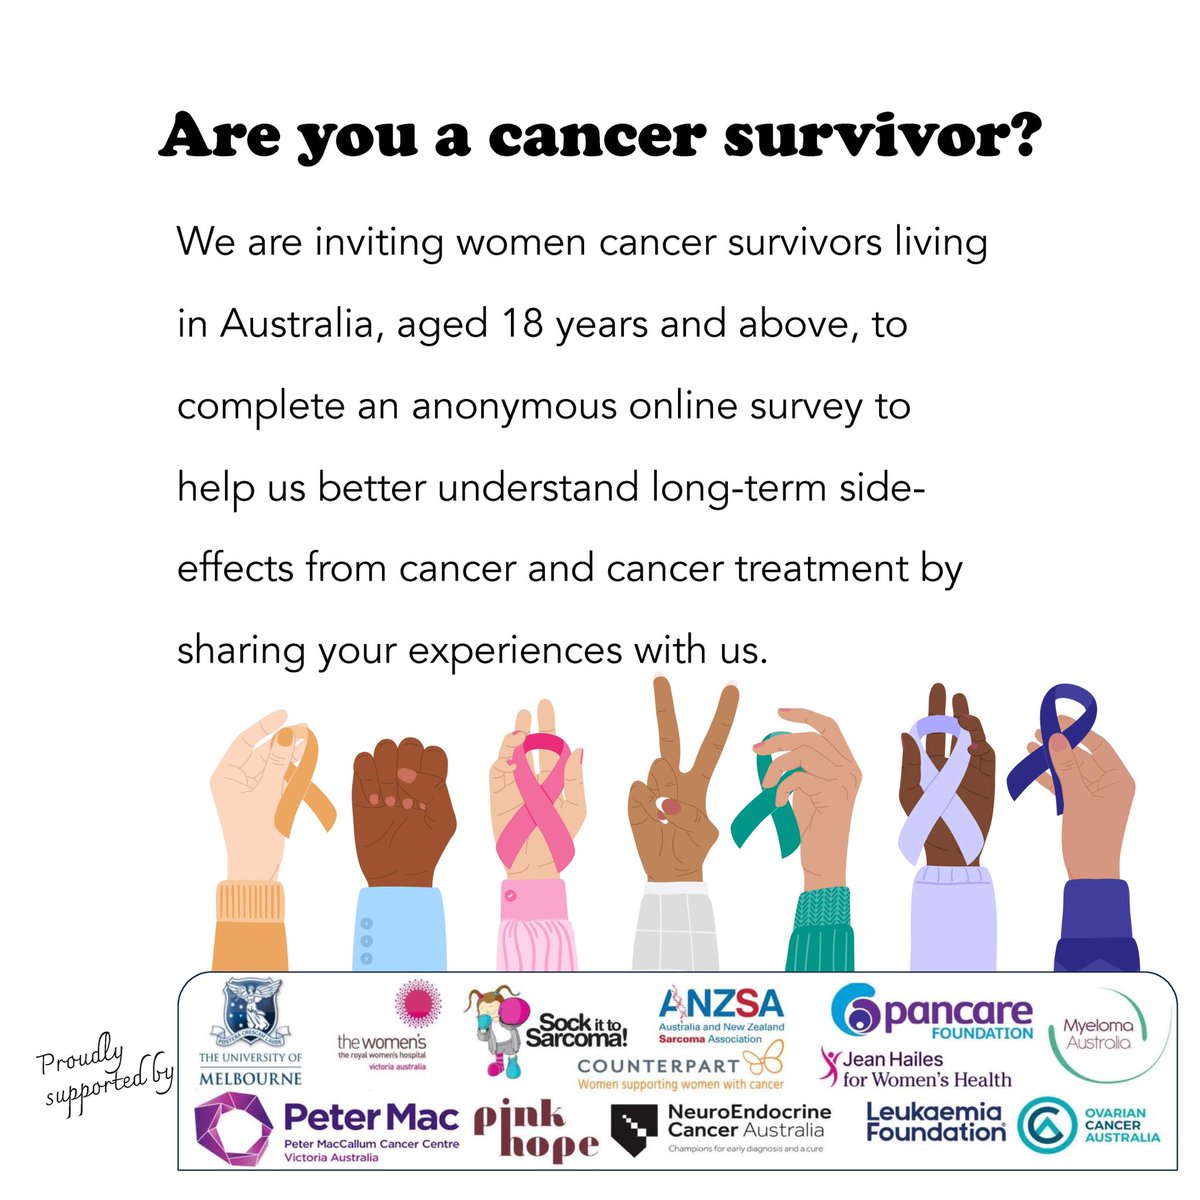 We are inviting women sarcoma survivors in Australia to complete an anonymous online survey to help us better understand long-term side effects from cancer by sharing your experiences with us. Please click on the link below to find out more: go.unimelb.edu.au/h98s